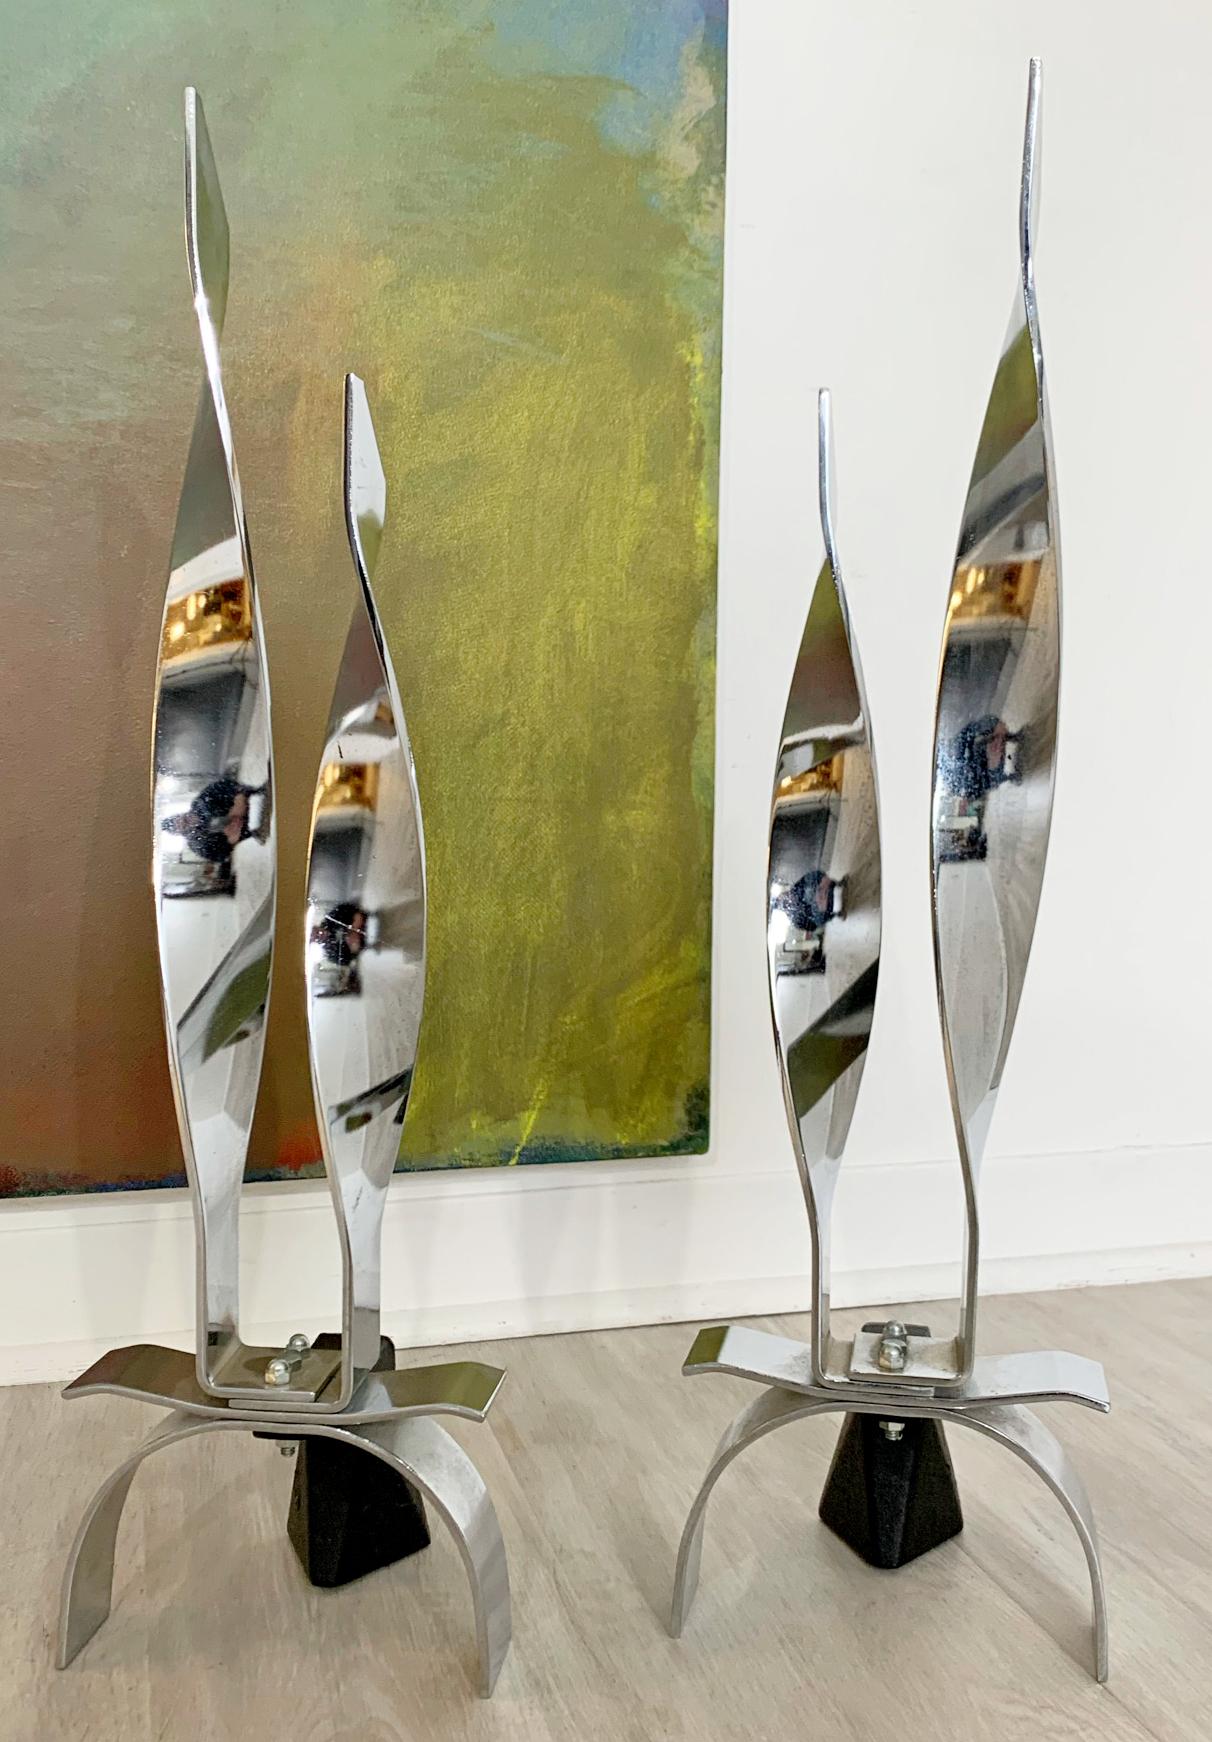 For your consideration is a gorgeous pair of polished steel andirons, table sculptures, made in Japan, circa the 1980s. In excellent condition. The dimensions of each are 7